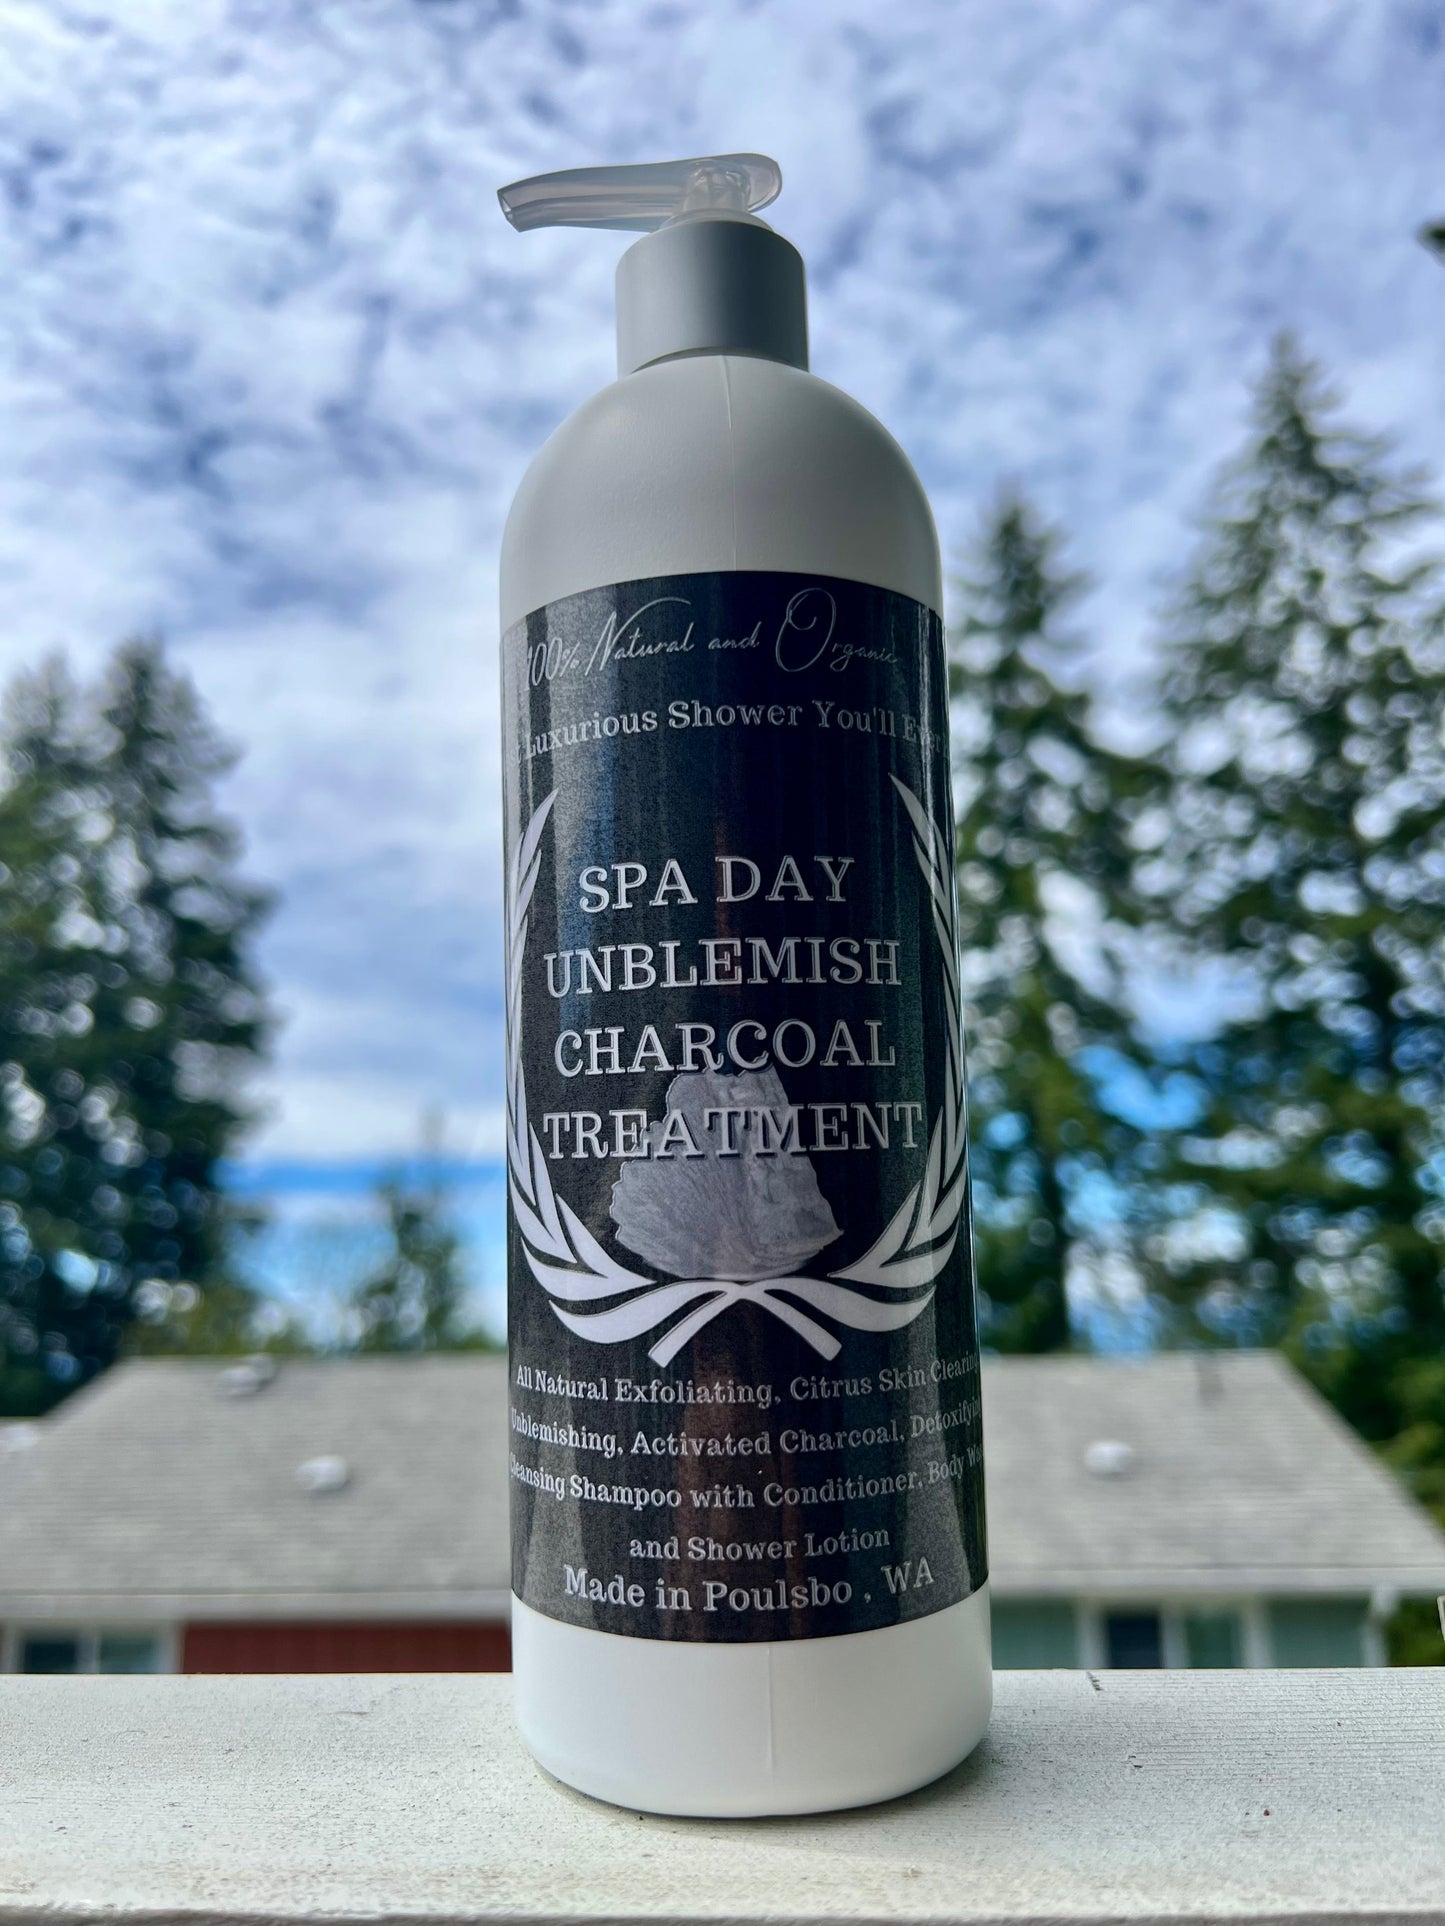 Spa Day Unblemish Charcoal Treatment Shower Lotion